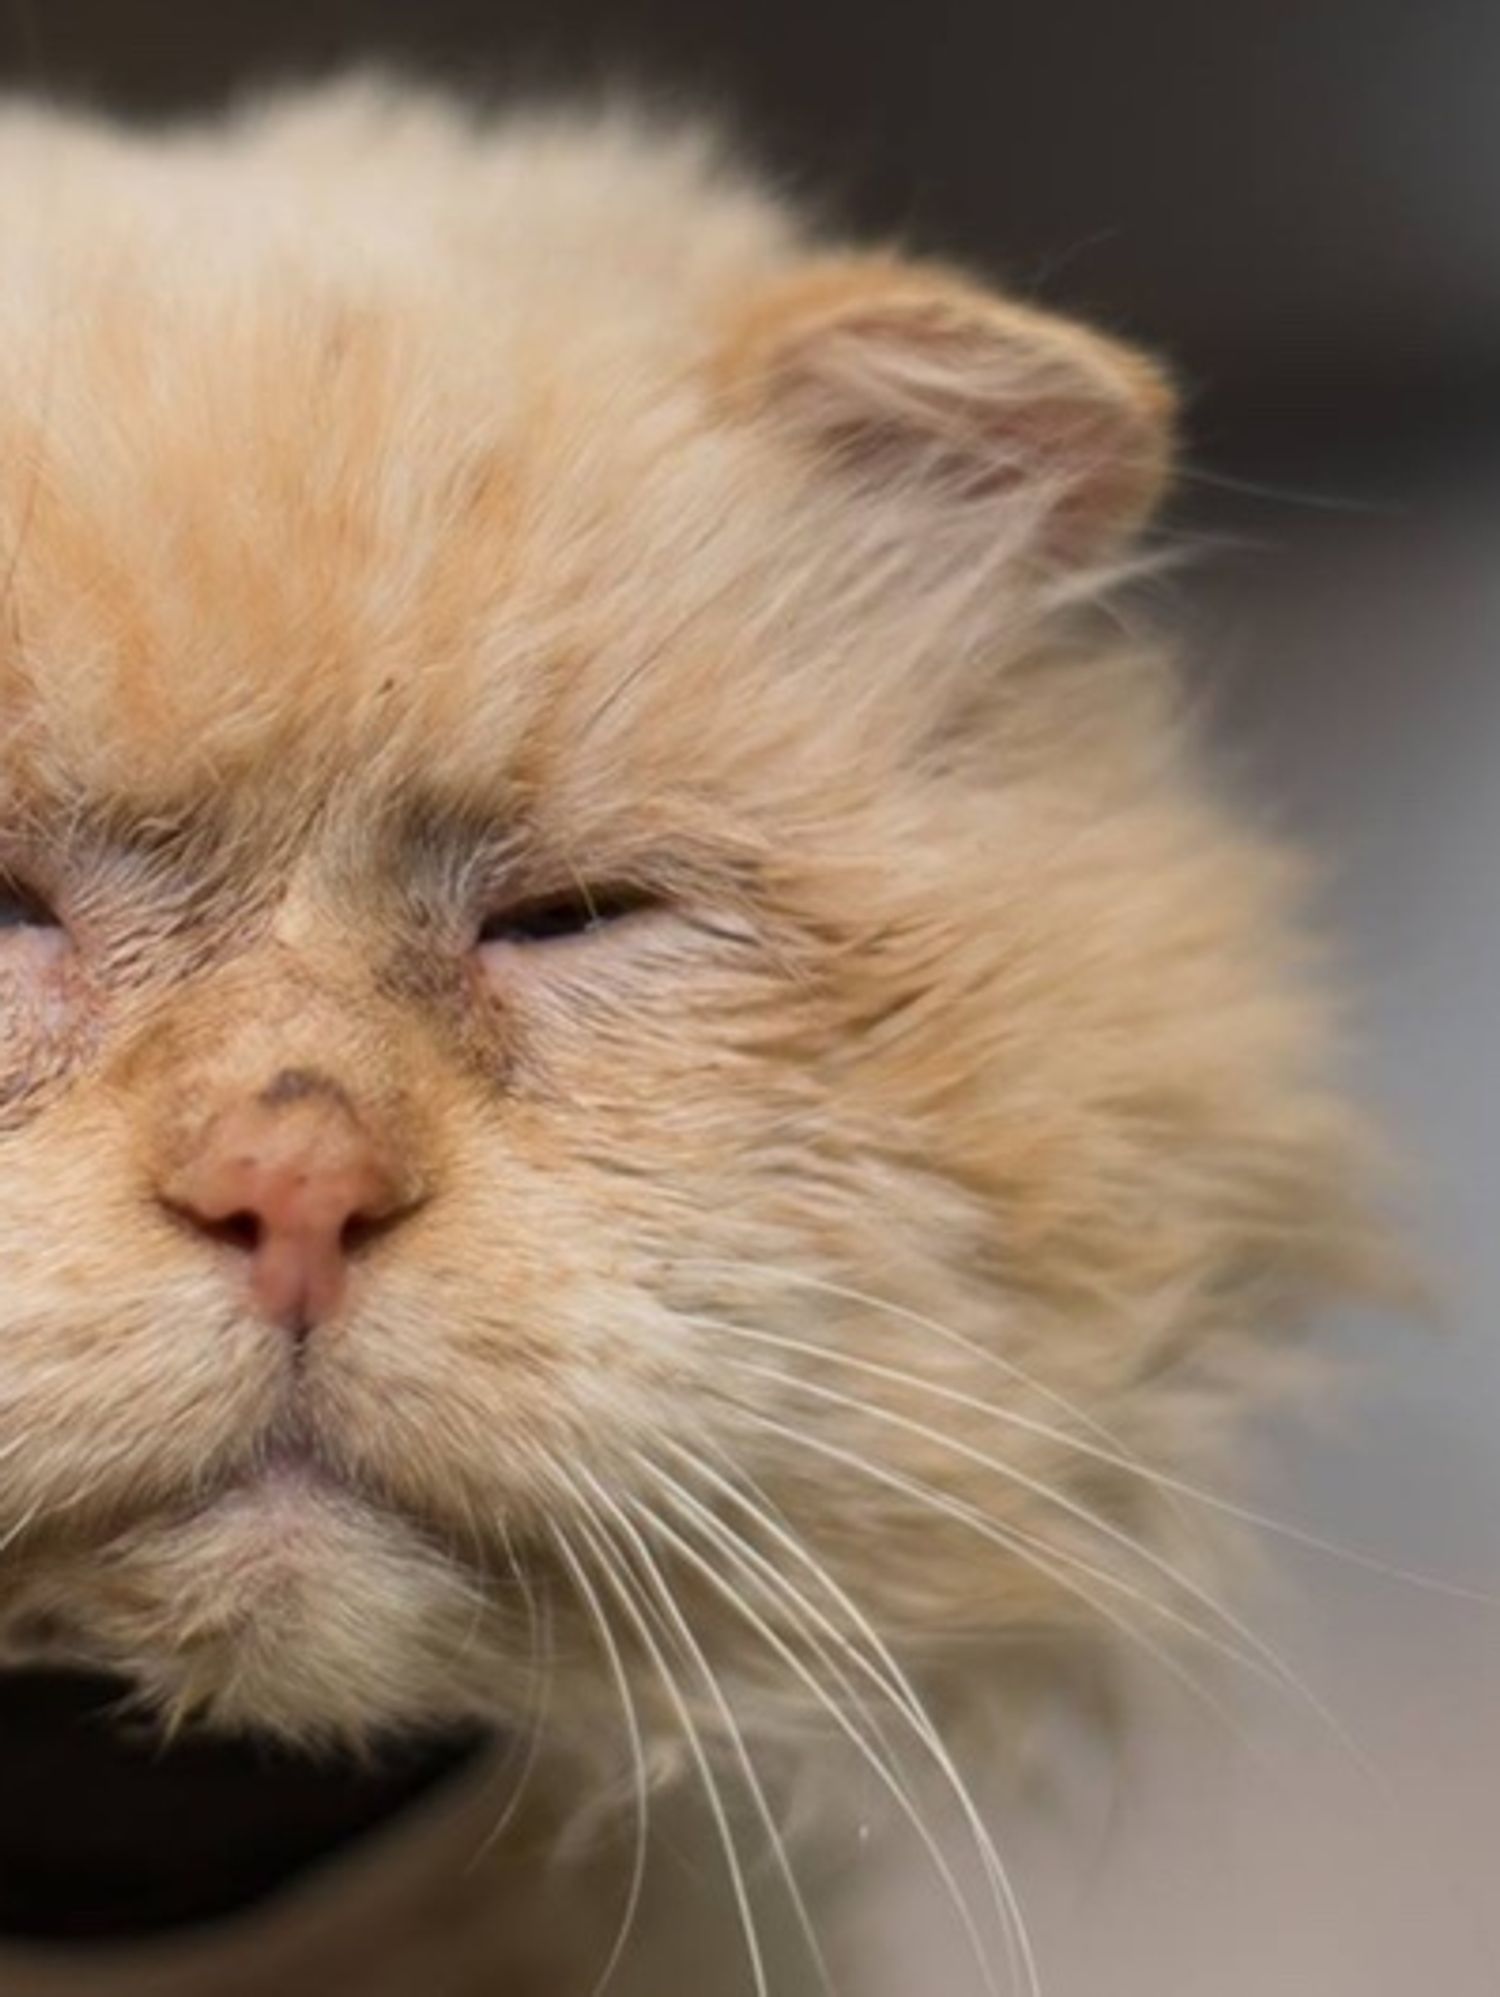 They Refuse to Give up On Sad Shelter Cat Who Was Found Wounded, a ...